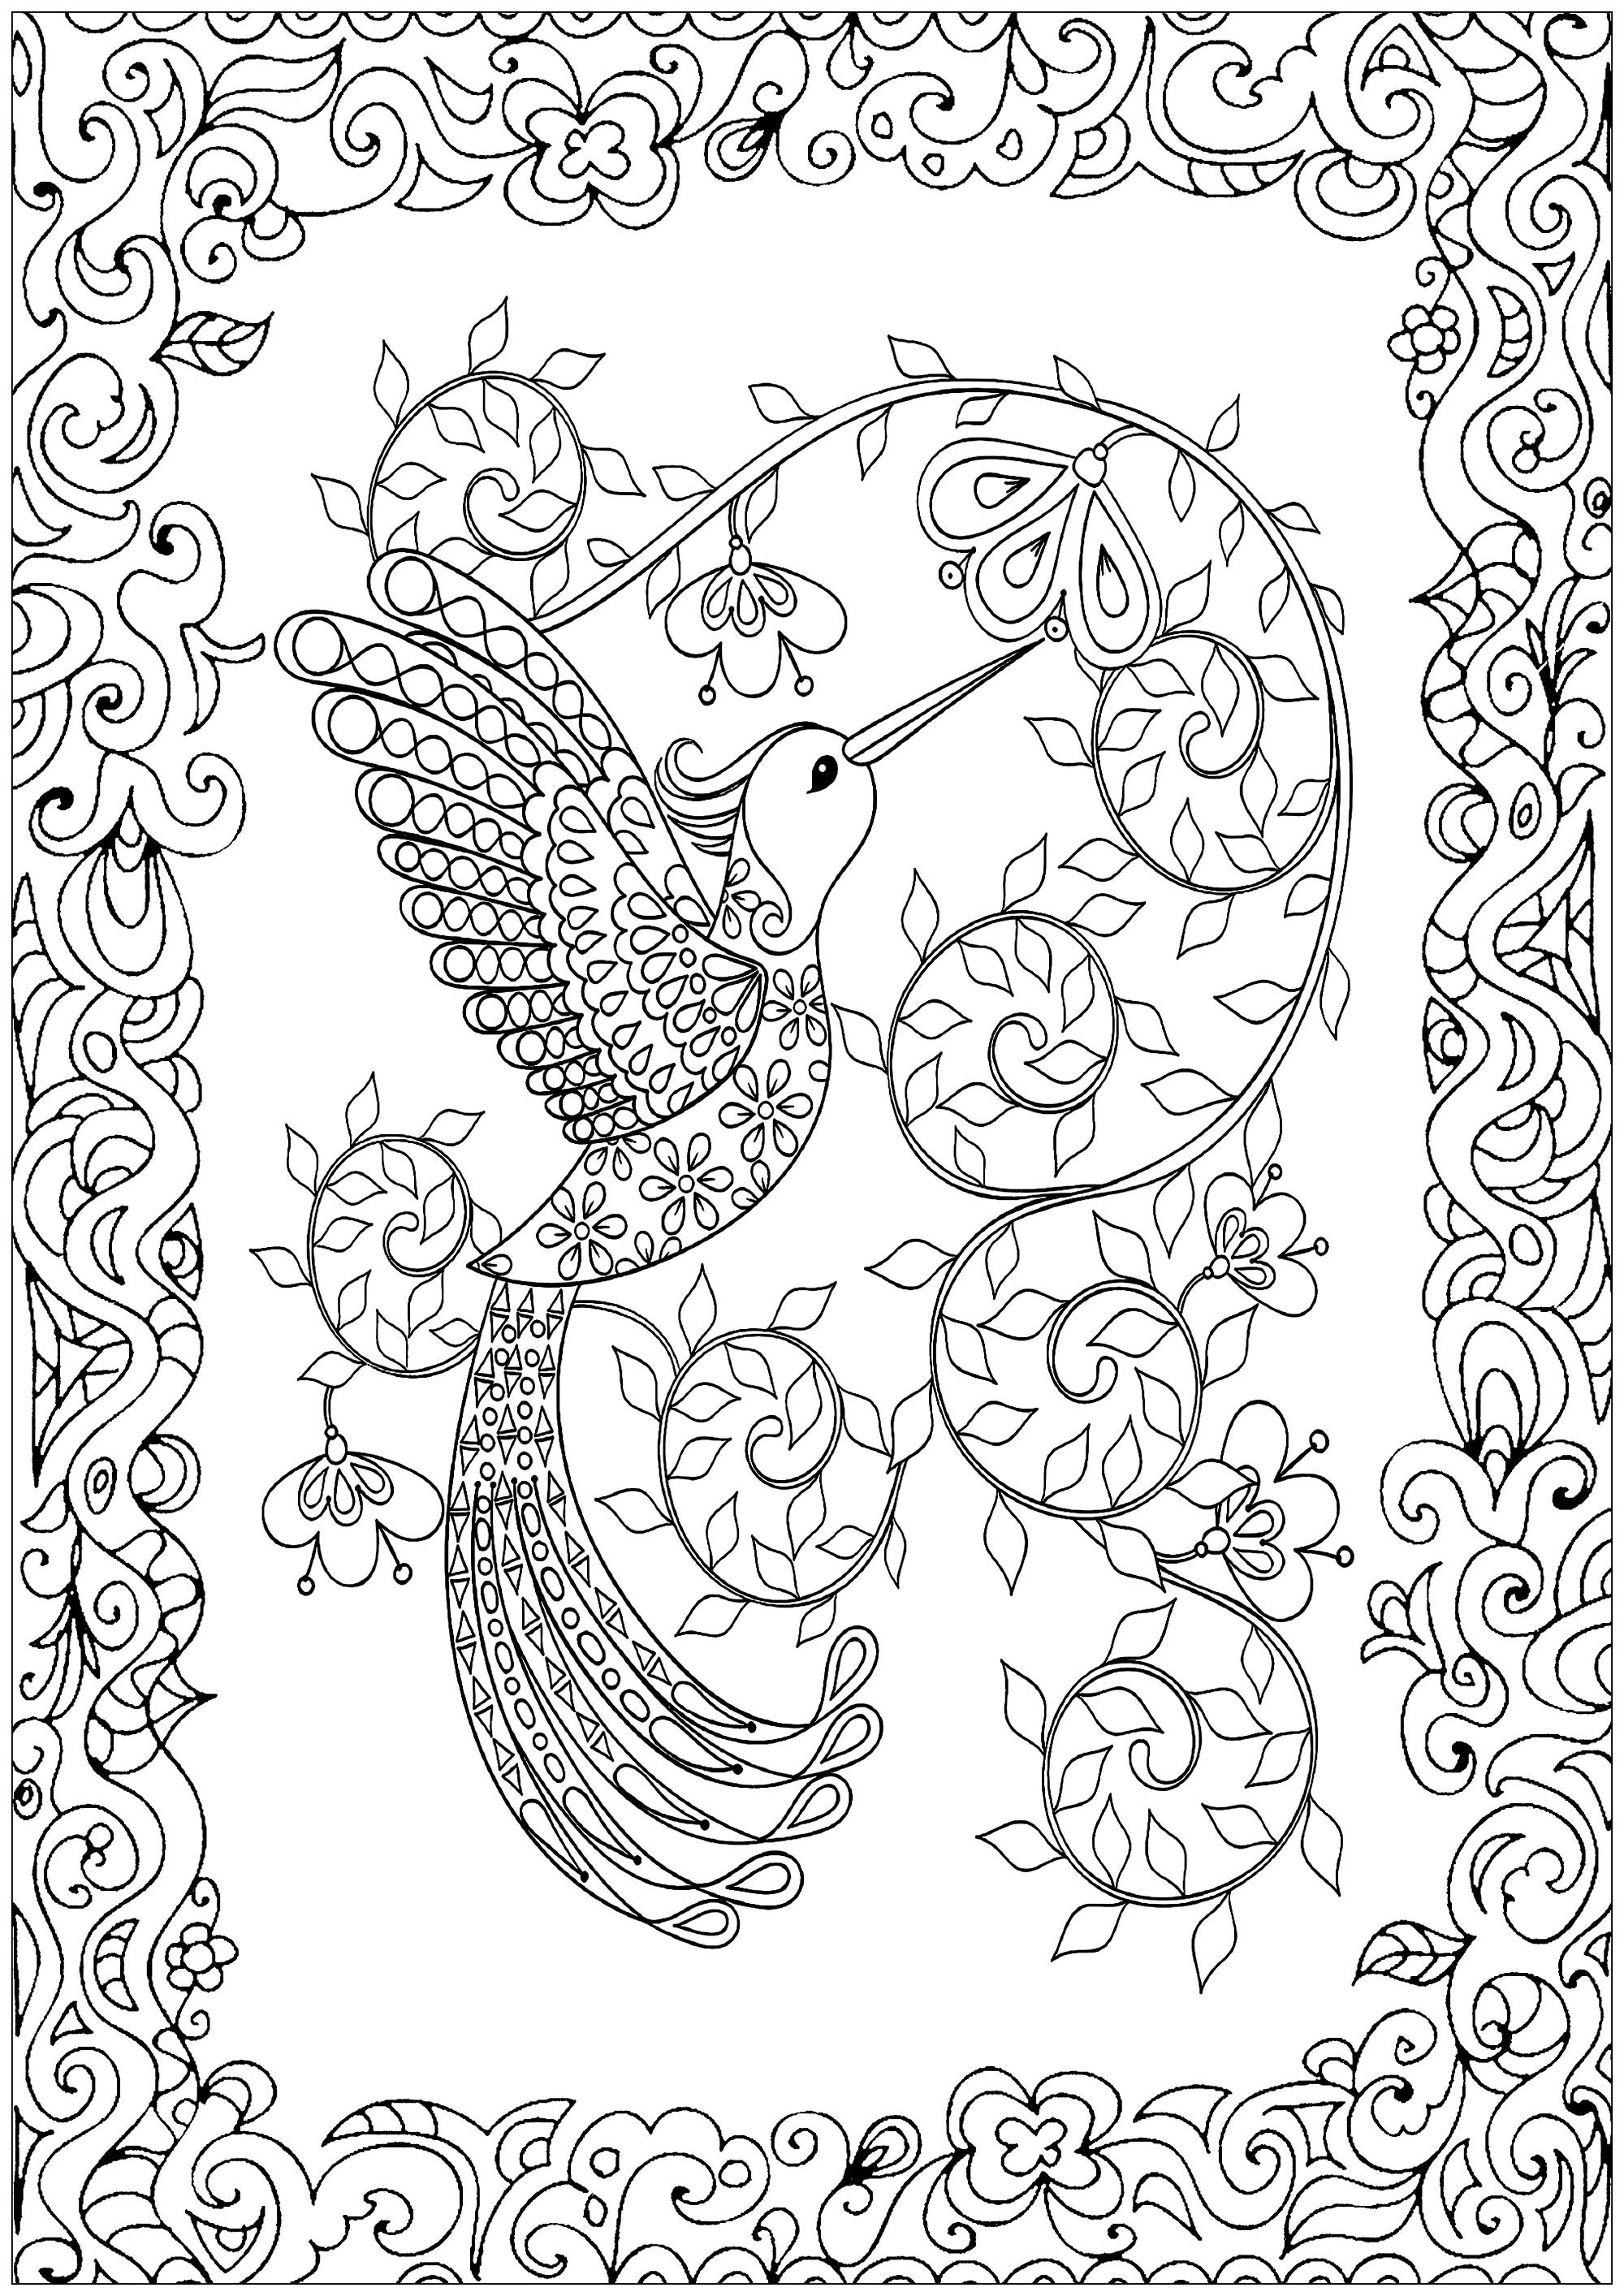 Humming bird, beautiful coloring page with border full of plant motifs to be colored, Artist : Art. Isabelle